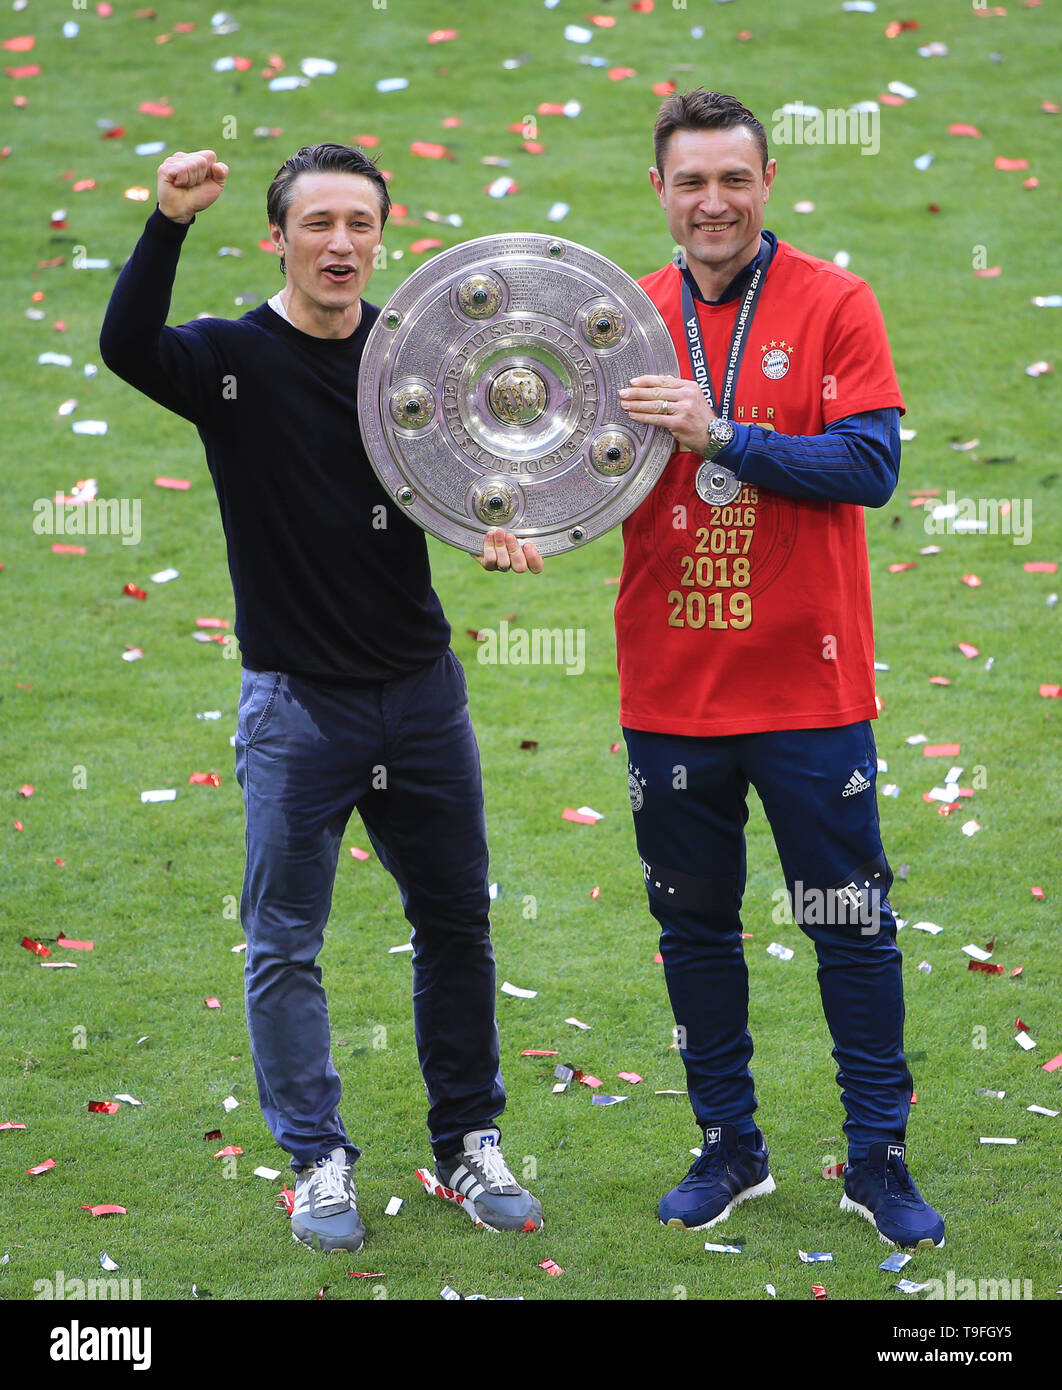 Munich, Germany. 18th May, 2019. Bayern Munich's head coach Niko Kovac (L)  and his brother and assistant coach Robert Kovac pose for photos with the  trophy during the awarding ceremony after a